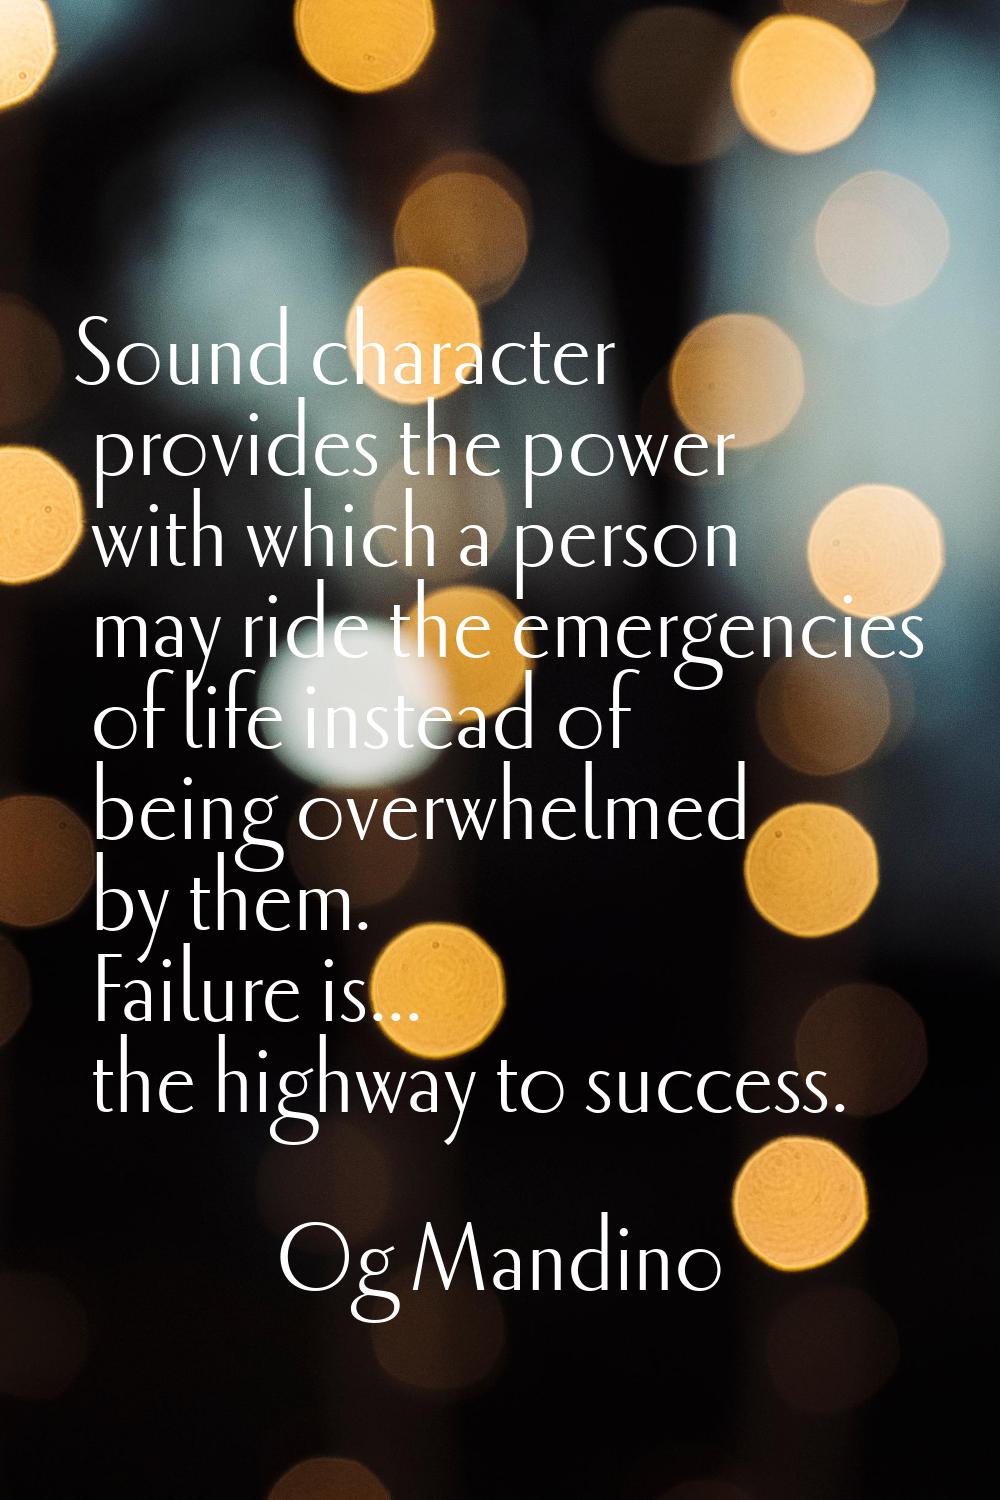 Sound character provides the power with which a person may ride the emergencies of life instead of 